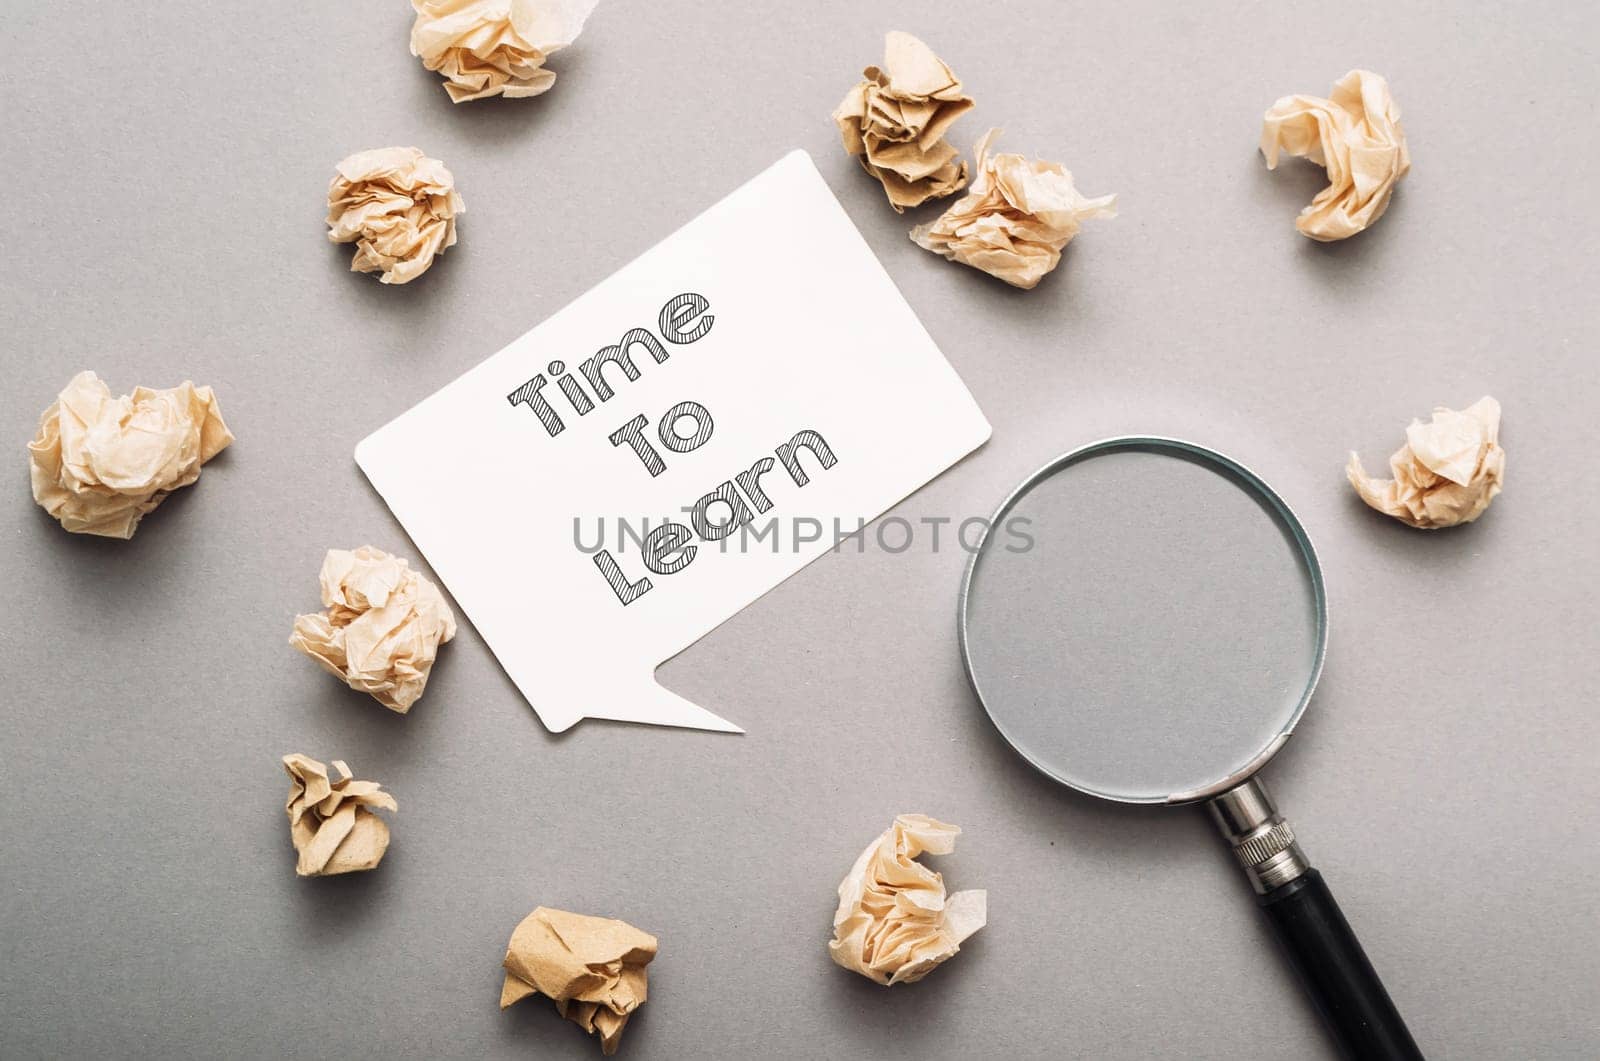 A white sign with the words Time to Learn written on it is surrounded by shredded paper. The shredded paper is scattered around the sign, creating a sense of chaos and disorganization